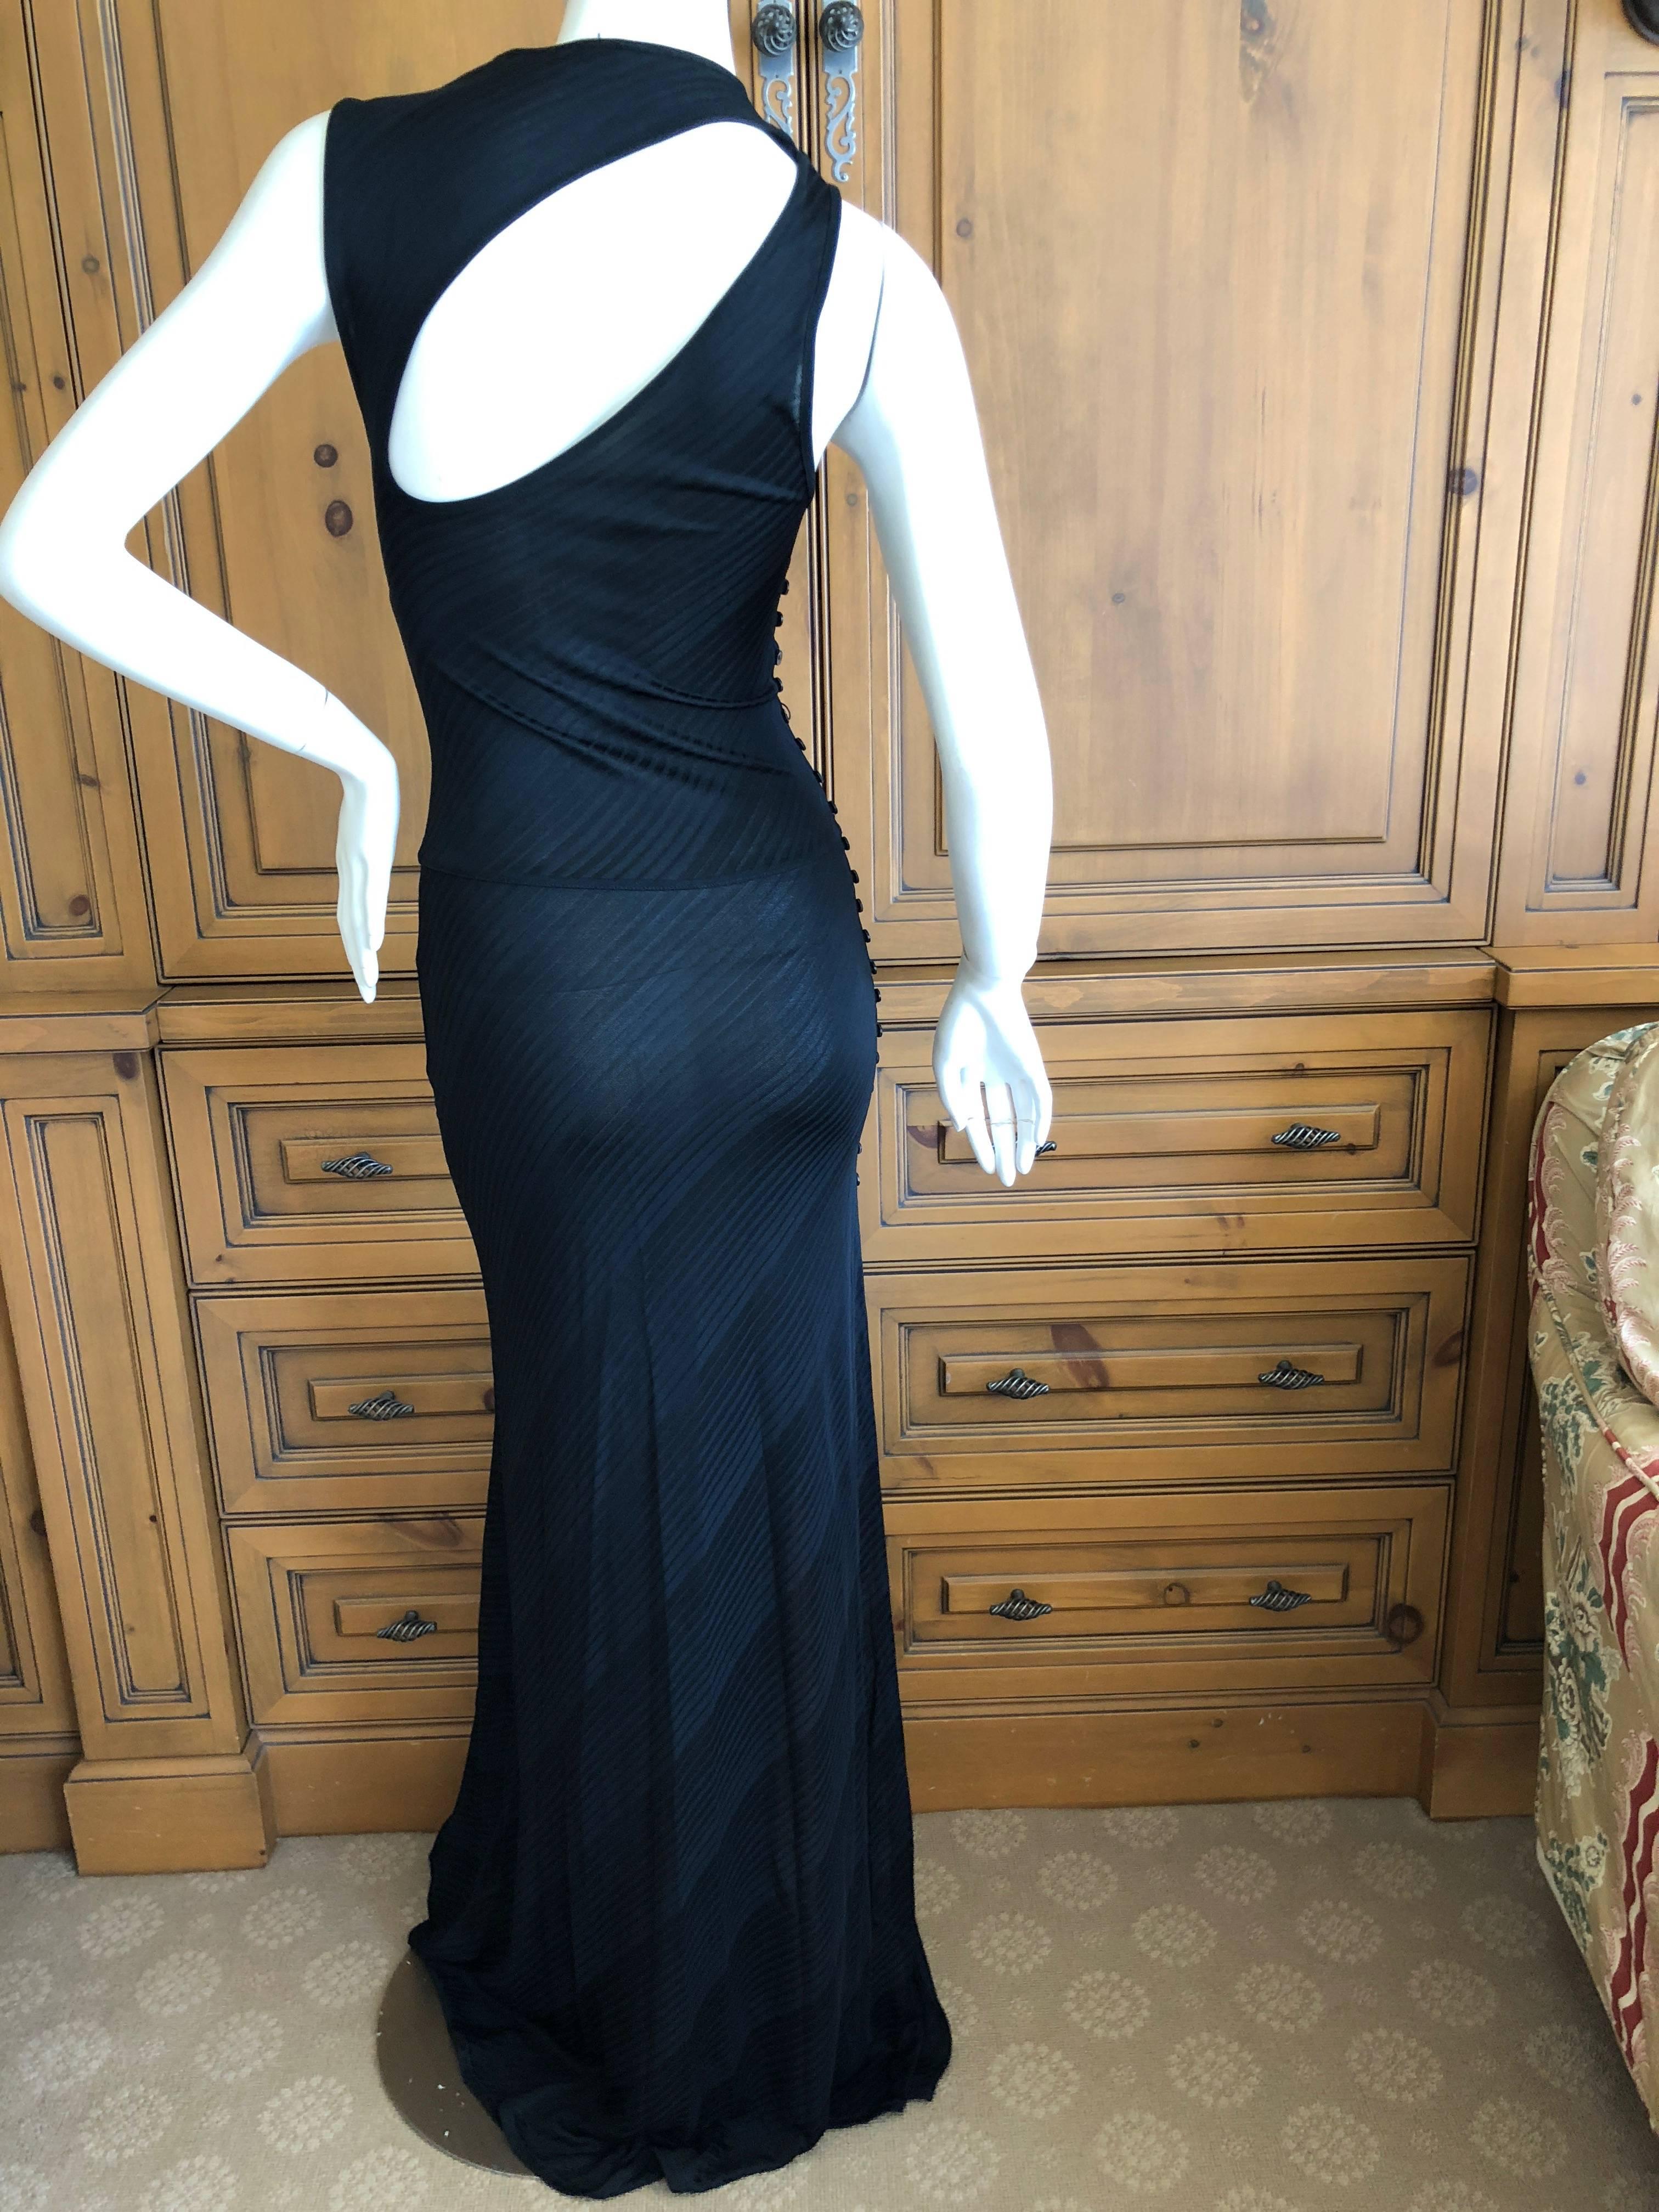  Vintage Versus, Gianni Versace Sexy Sheer Side Slit Evening Dress w Cut Outs 3